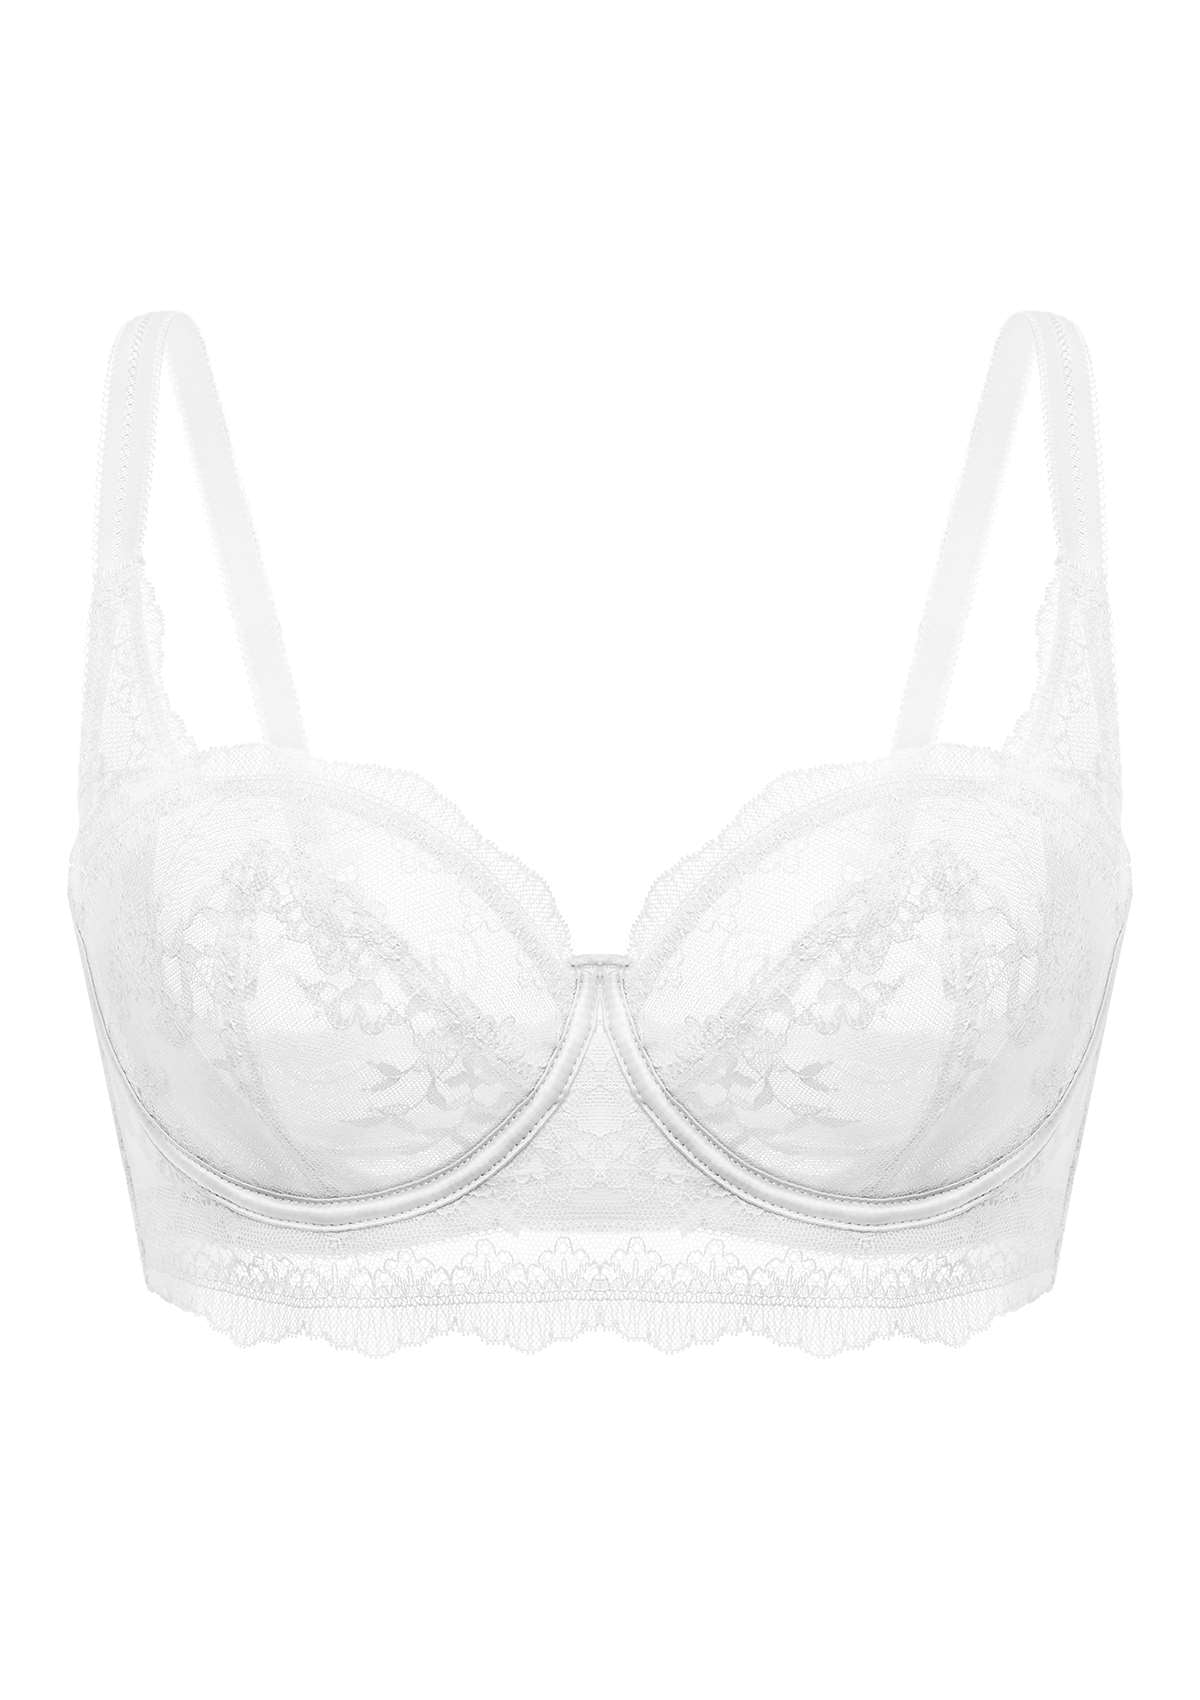 HSIA I Do Floral Lace Bridal Balconette Beautiful Bra For Special Day - White / 40 / D